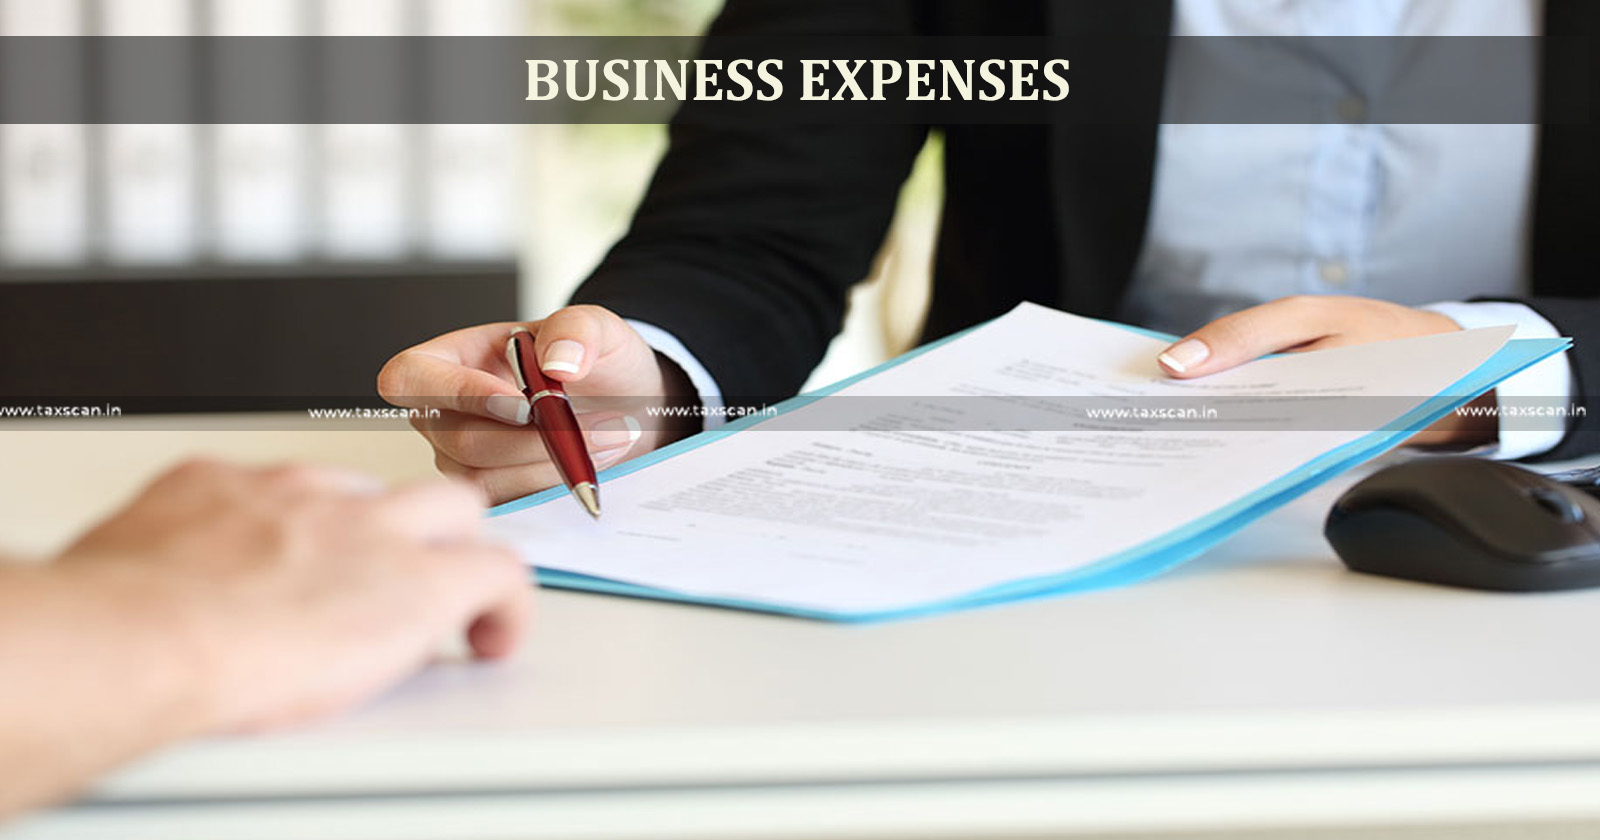 No Disallowance of Business Expenses - Disallowance - Service Charges Collected from Tenant -Business Expenses - Tenant - Service Charges- Income from Business - ITAT - taxscan